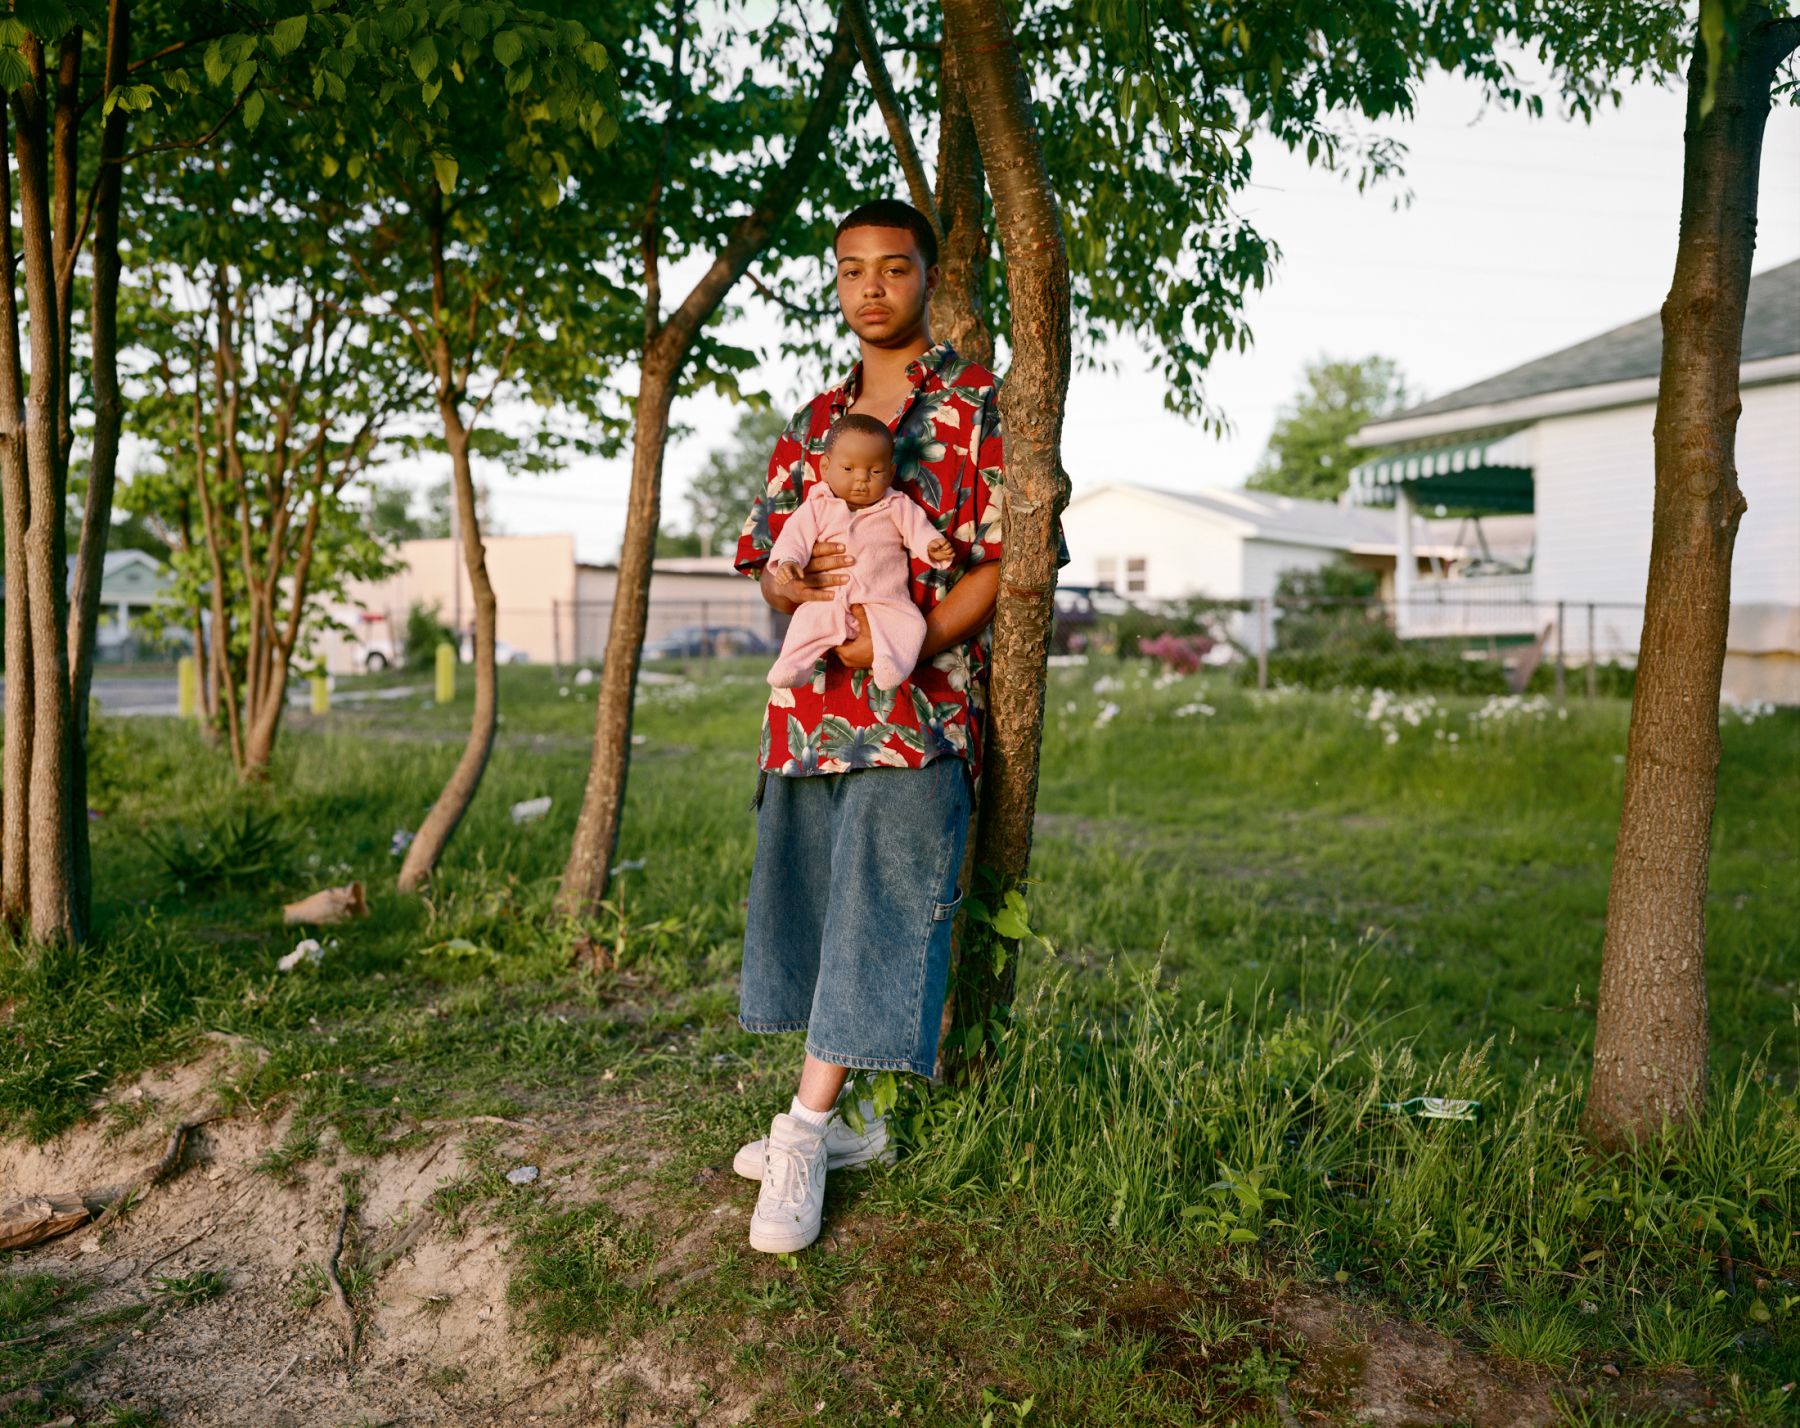 A Man With A Training Baby, Beckley, West Virginia, May 1999